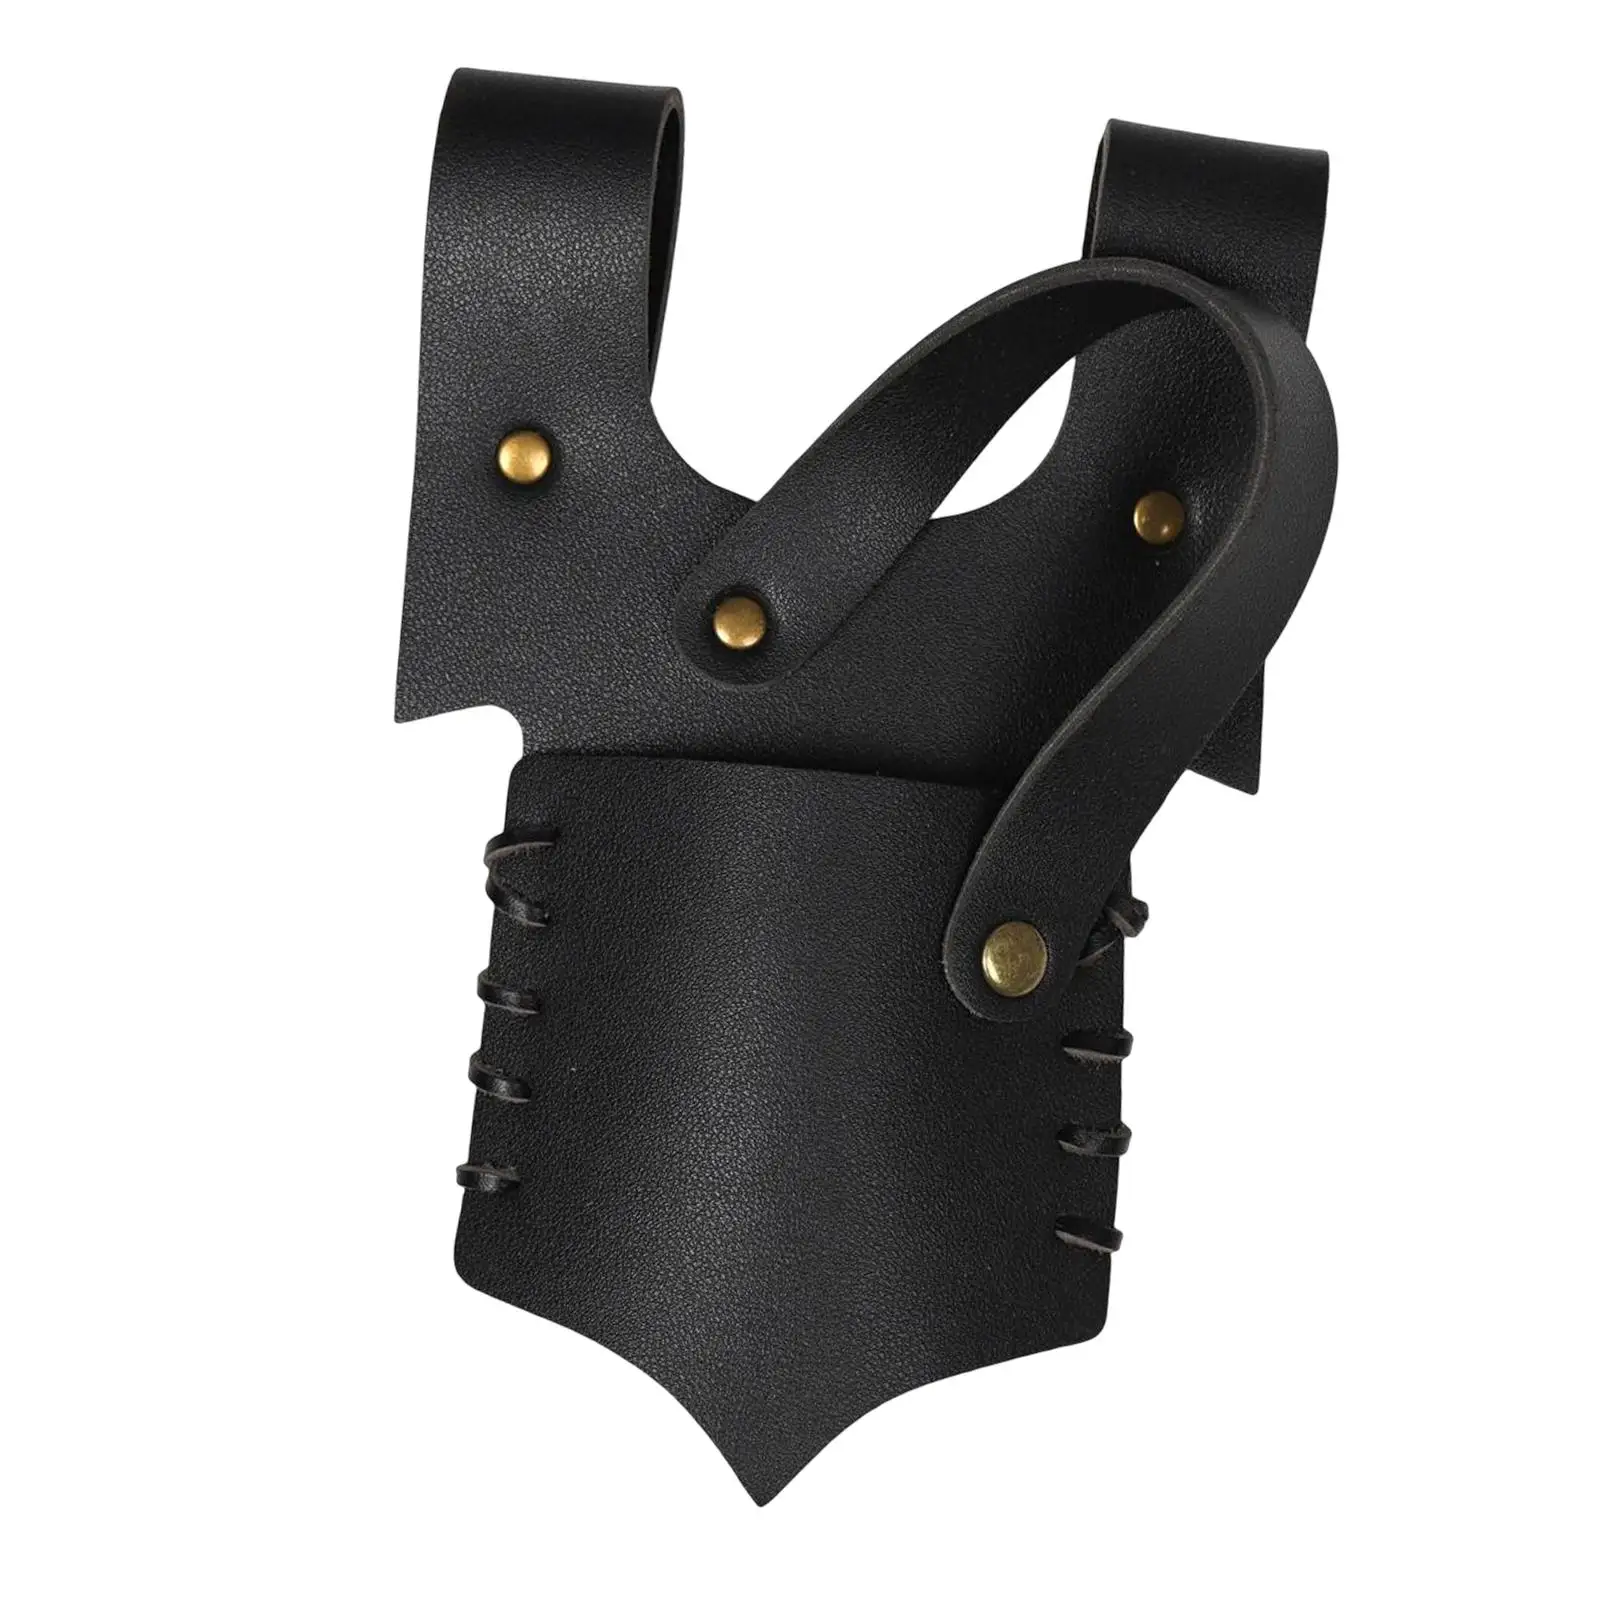 Medieval Leather Strap  Holder  Sheath Retro Style Durable Scabbard for Stage Performances Role Playing Cosplay